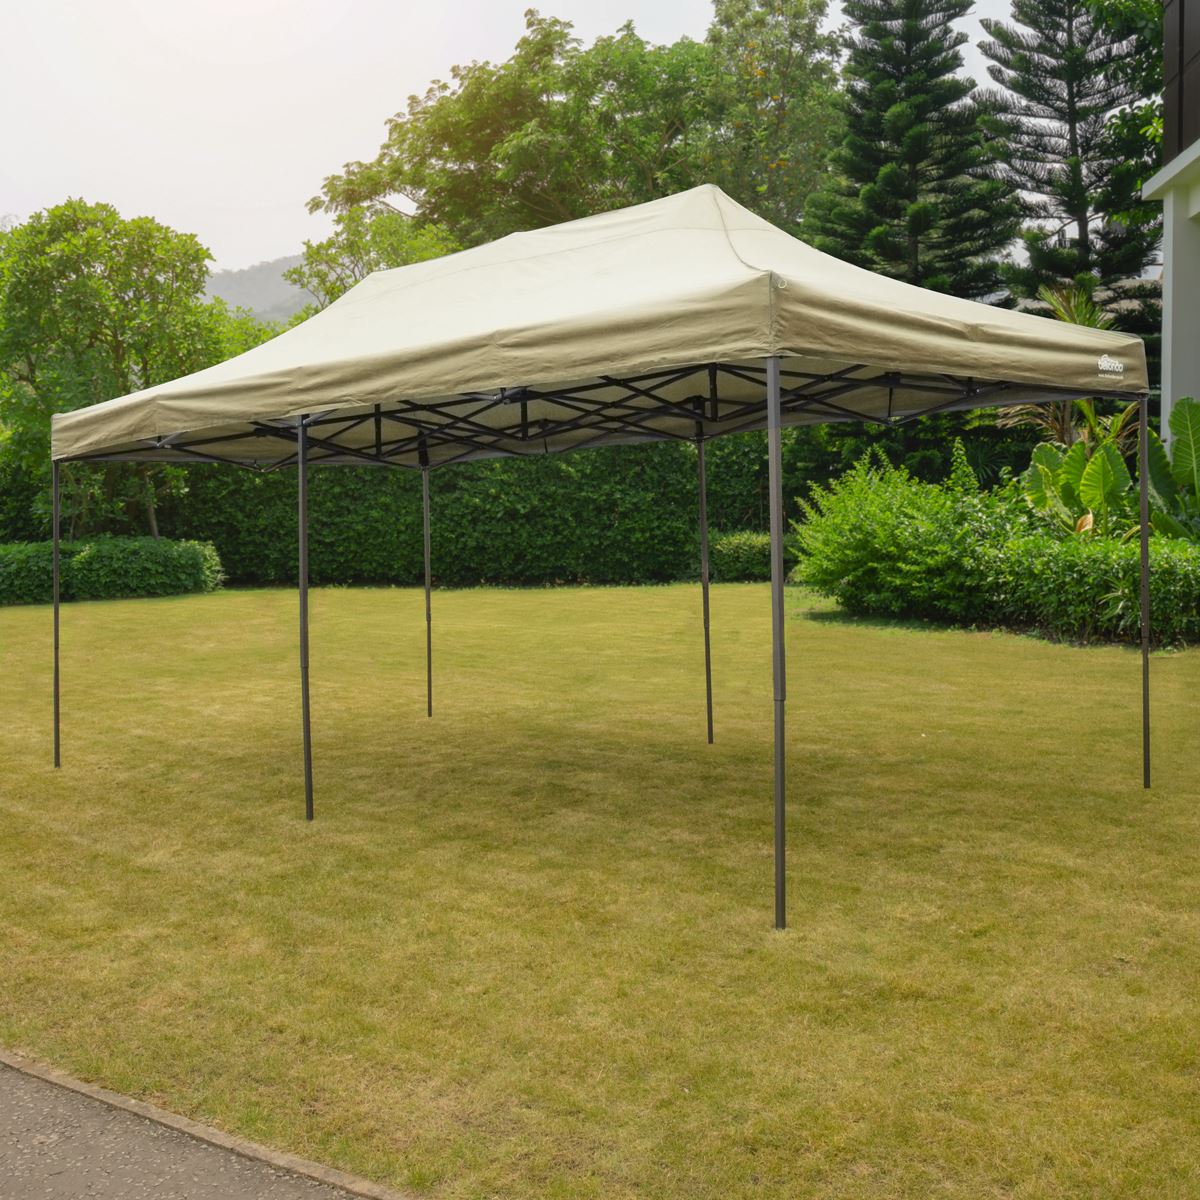 Dellonda Premium 3x6m Pop-Up Gazebo, Heavy Duty, PVC Coated, Water Resistant Fabric Supplied with Carry Bag, Rope, Stakes & Weight Bags - Beige Canopy